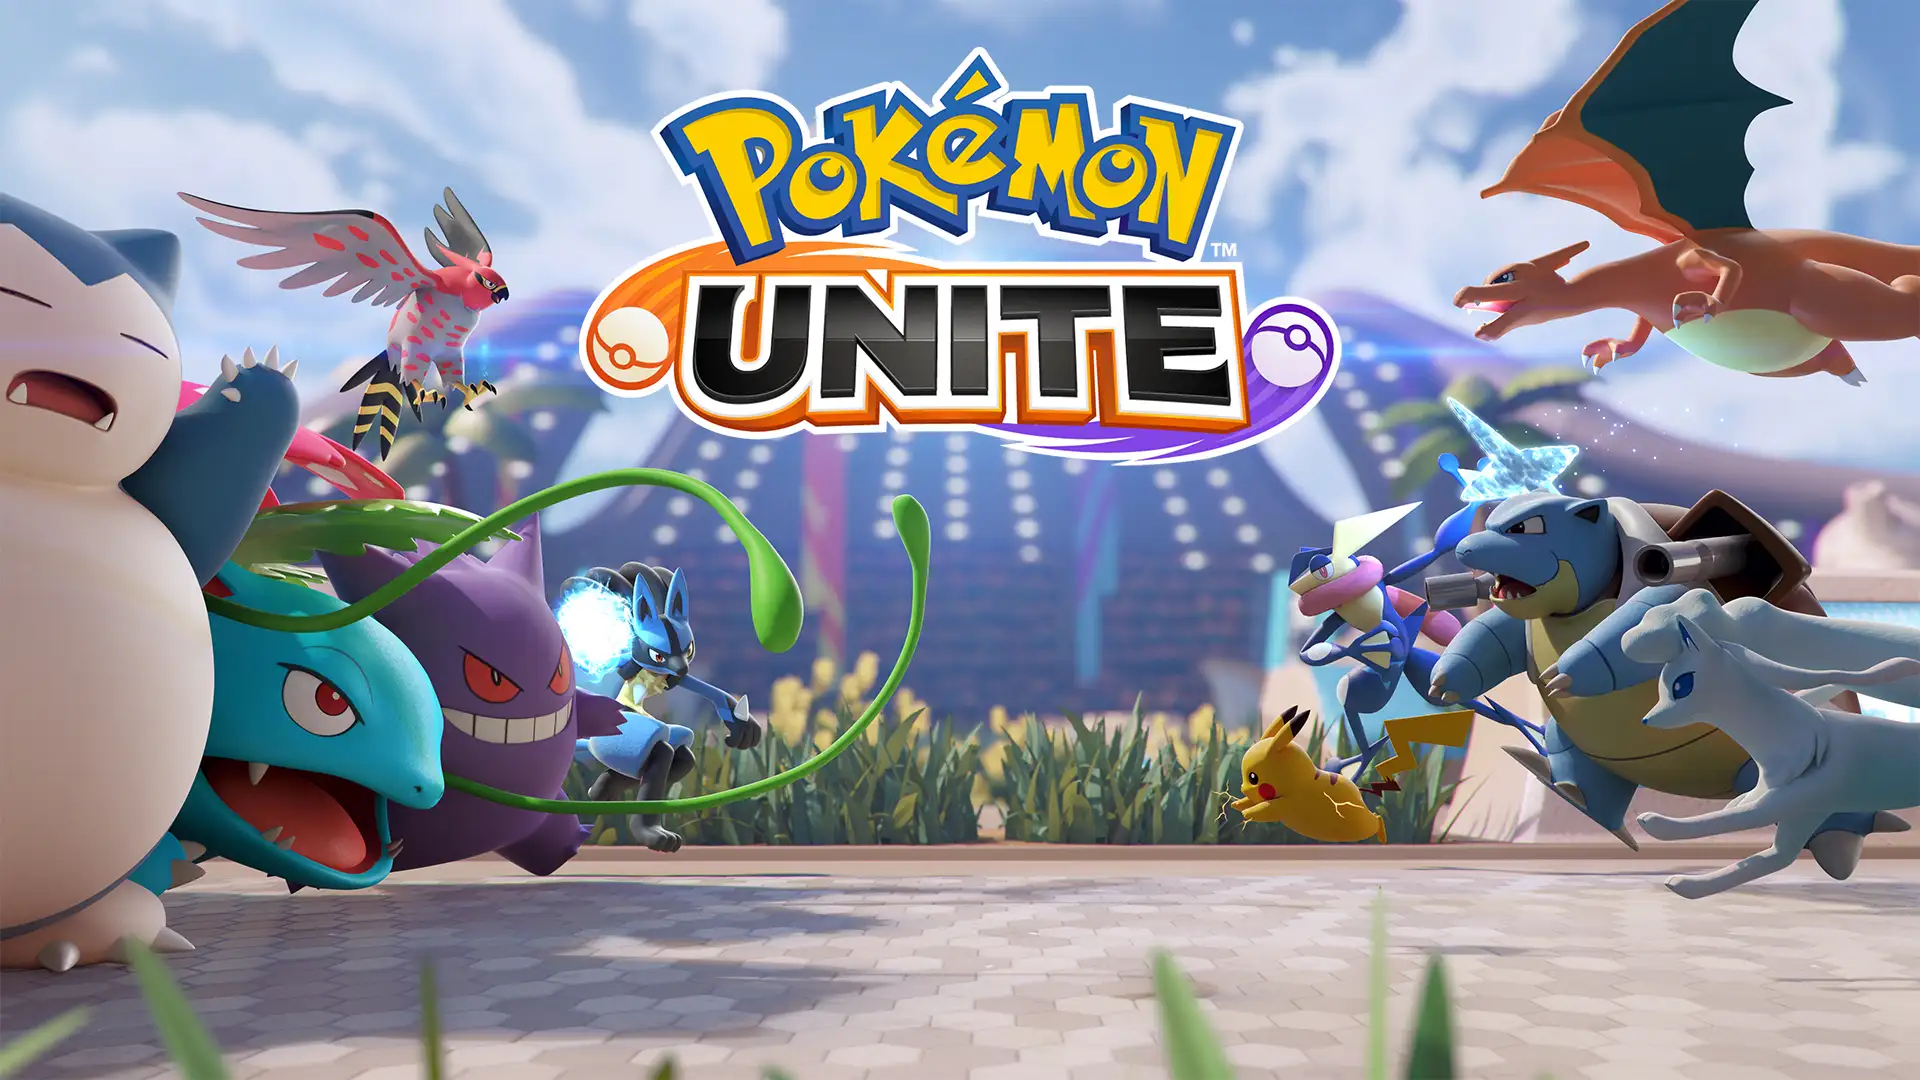 Featured - Pokémon Unite: A Simple Guide to Controls, Gameplay, and Best Settings